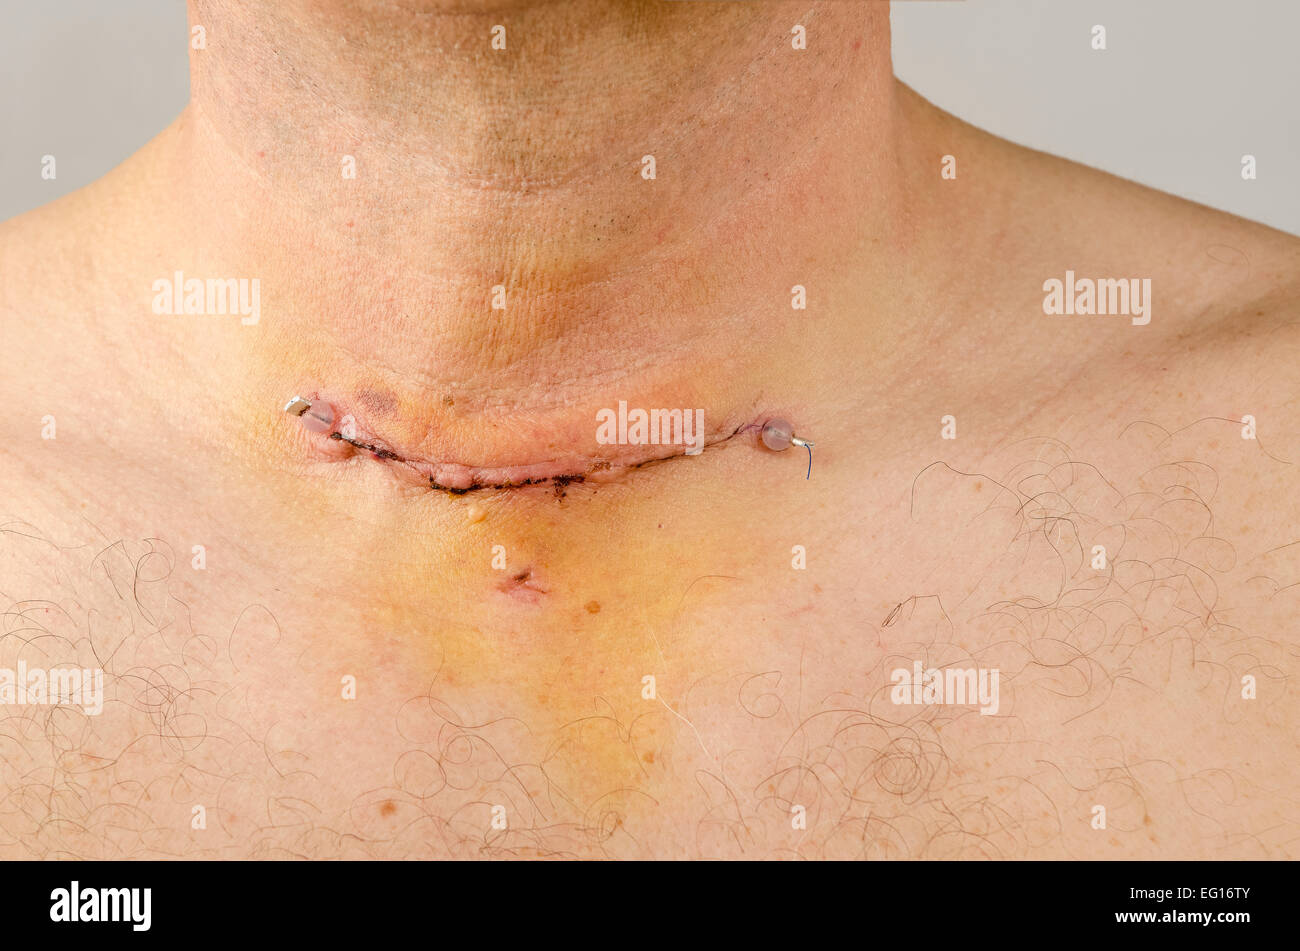 post operative scar wound and stitch of thyroidectomy also showing where drain was inserted release available for certain uses Stock Photo